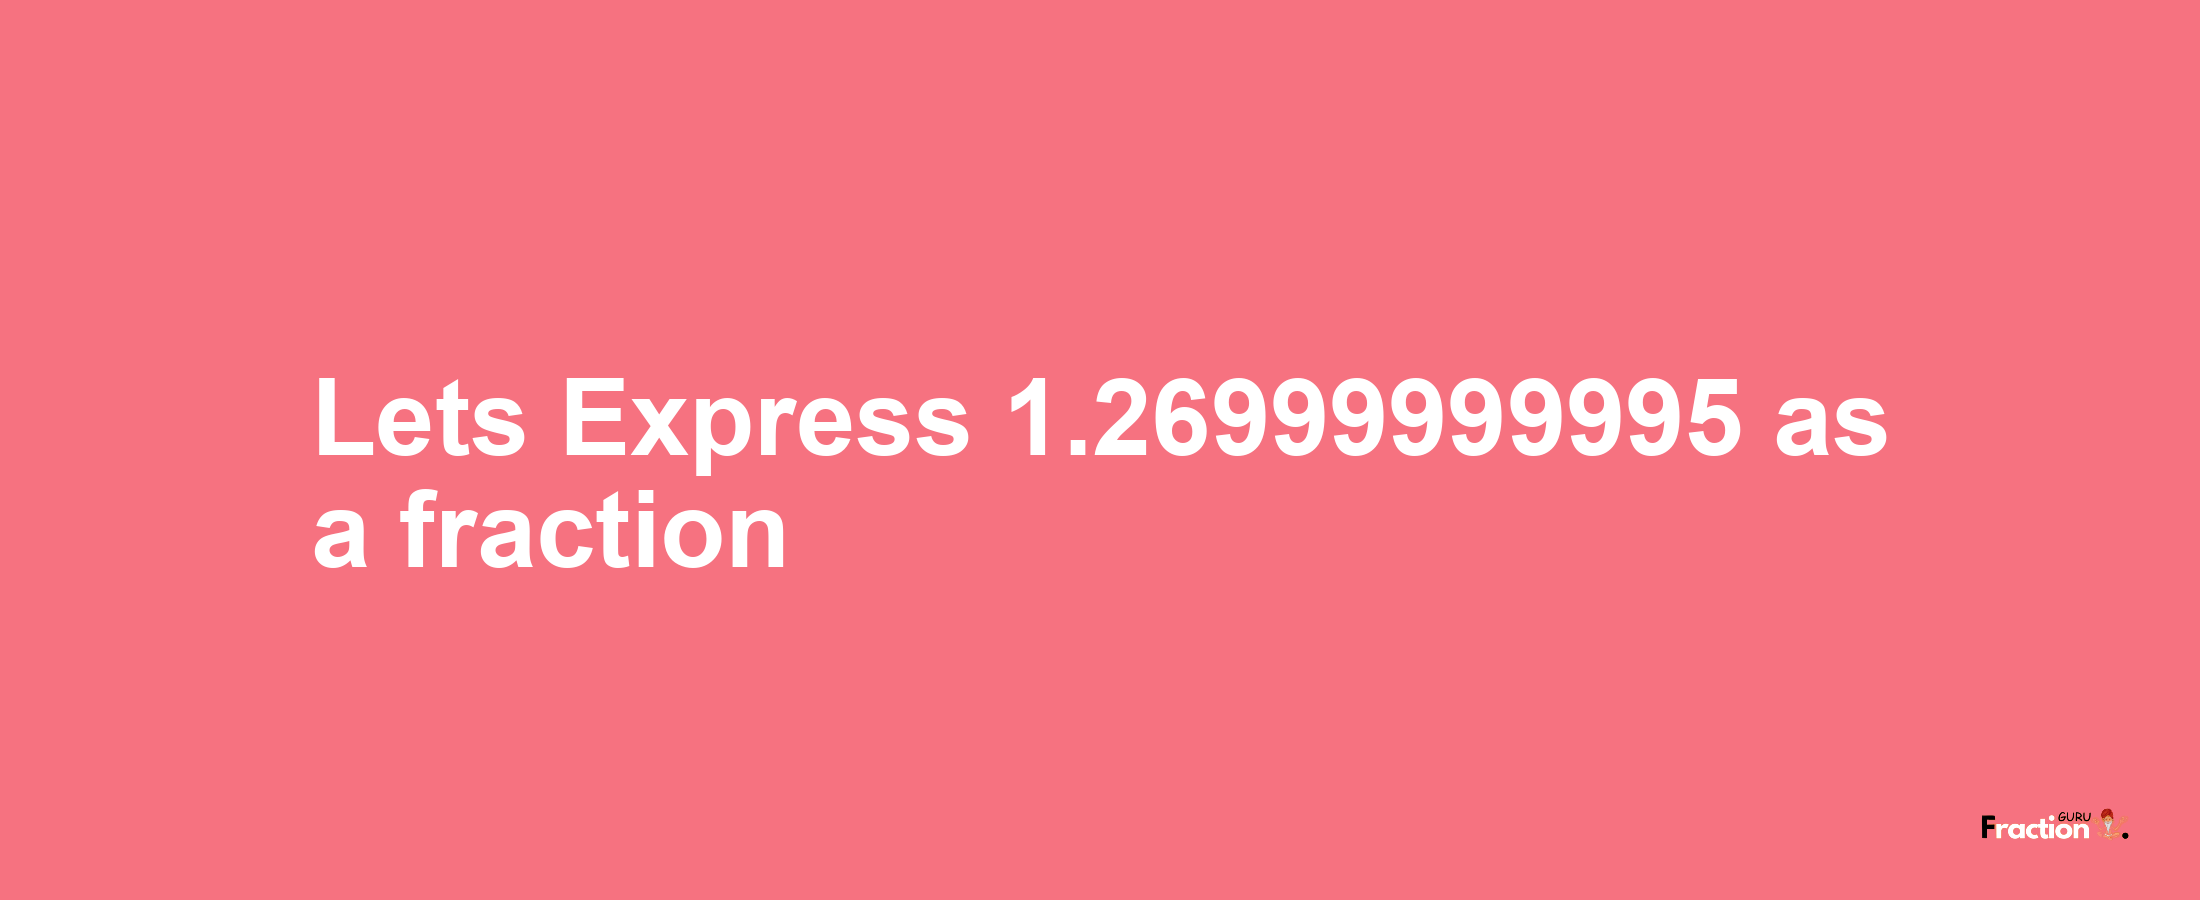 Lets Express 1.26999999995 as afraction